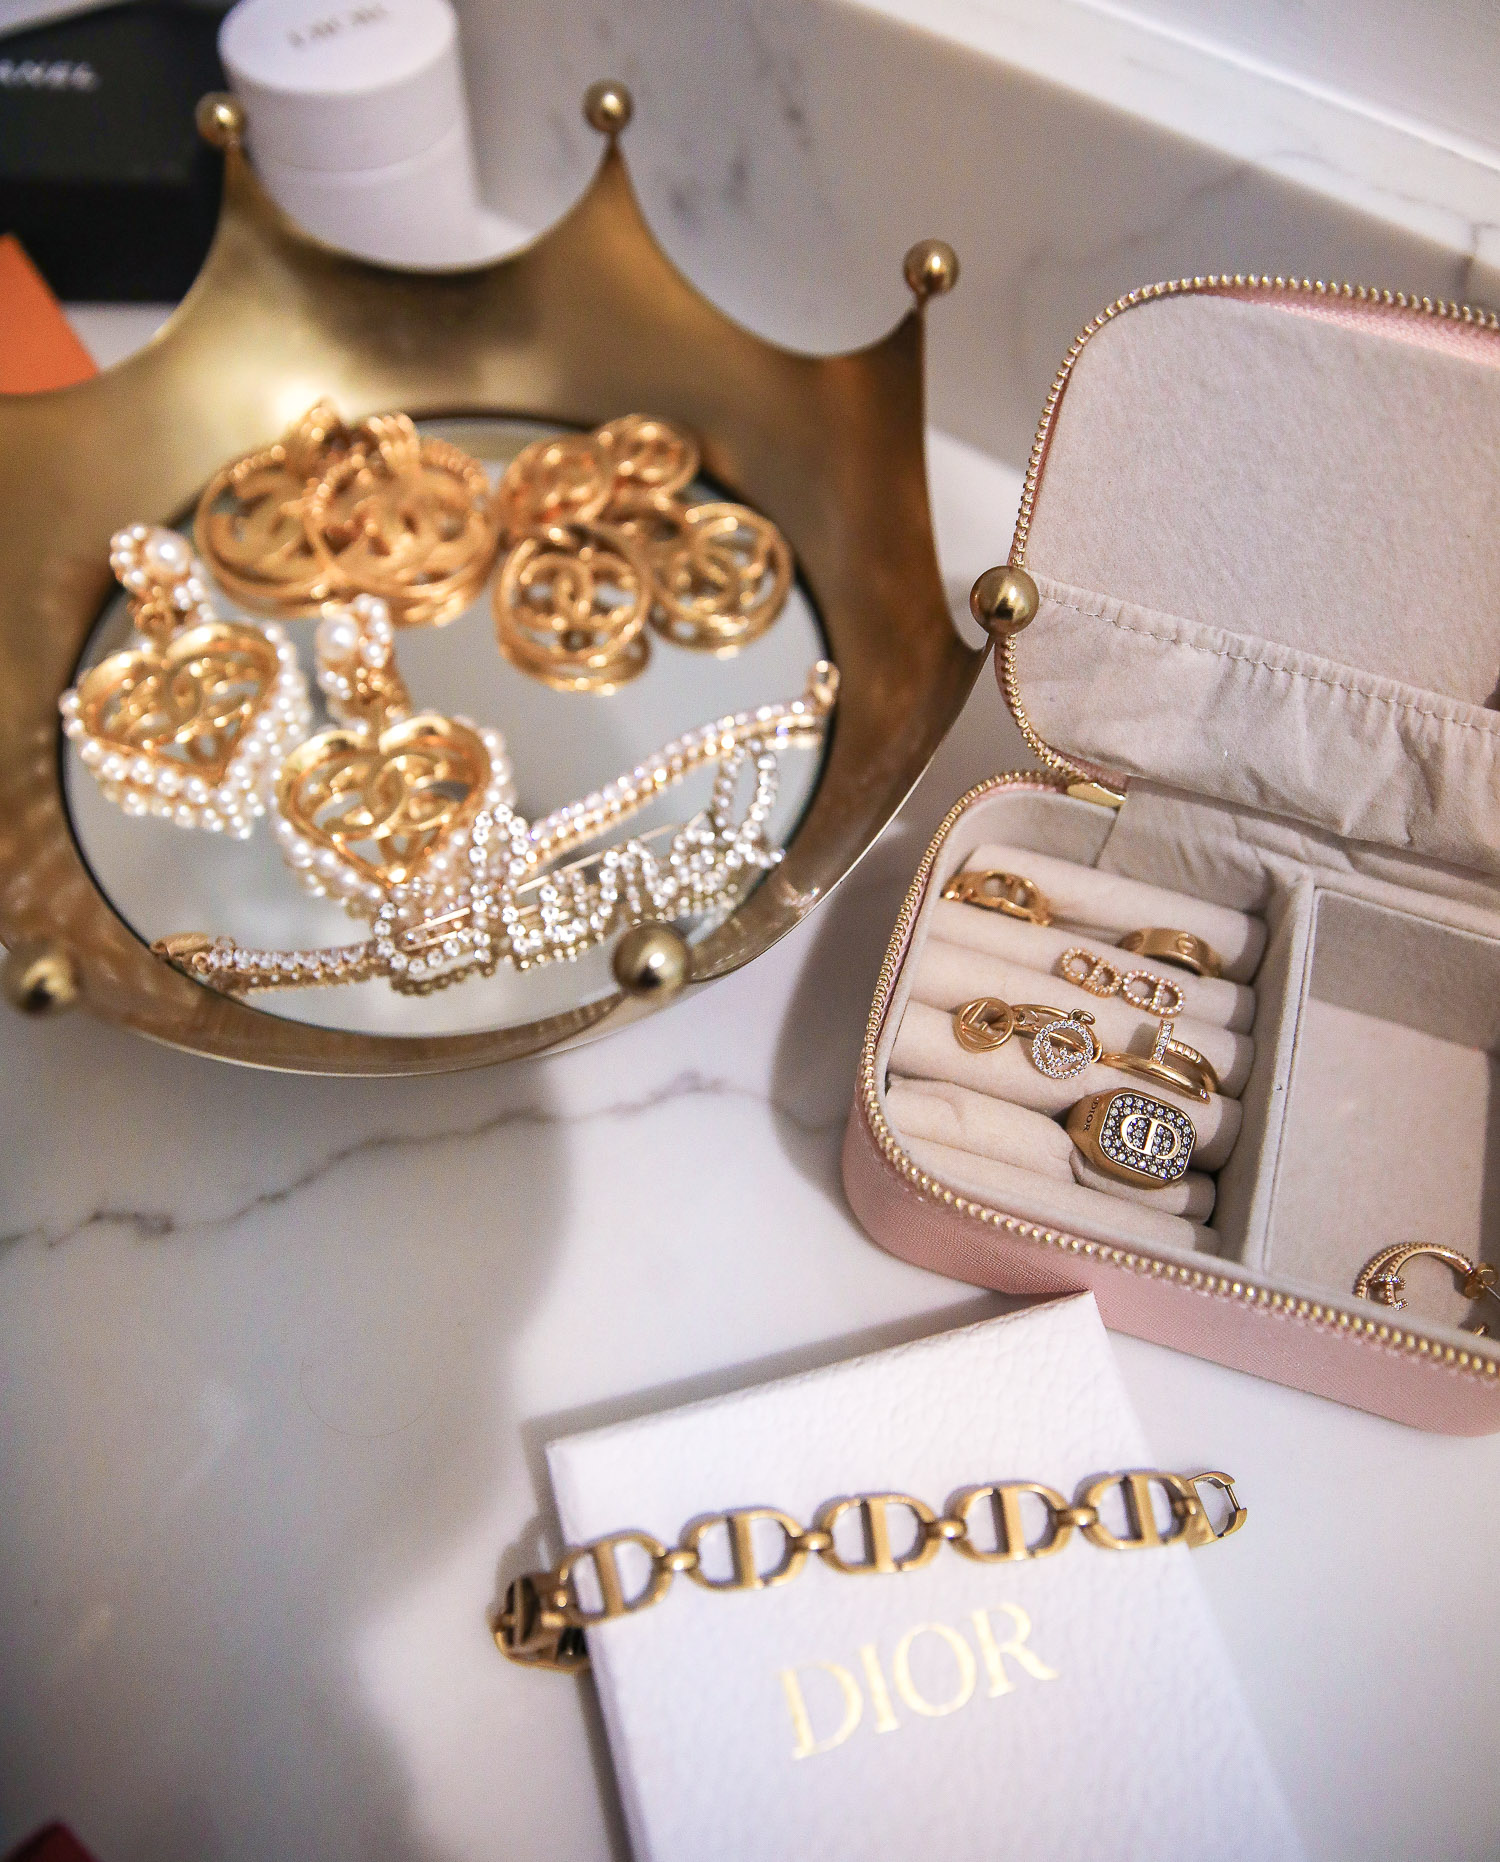 jewelry storage and organization, master bedroom decoration and design, designer jewelry storage | Nighttime Routine by popular US beauty blog, The Sweetest Thing: image of Chanel jewelry in a crown jewelry dish, a Dior bracelet, and Dior and Fendi rings in a pink jewelry case. 